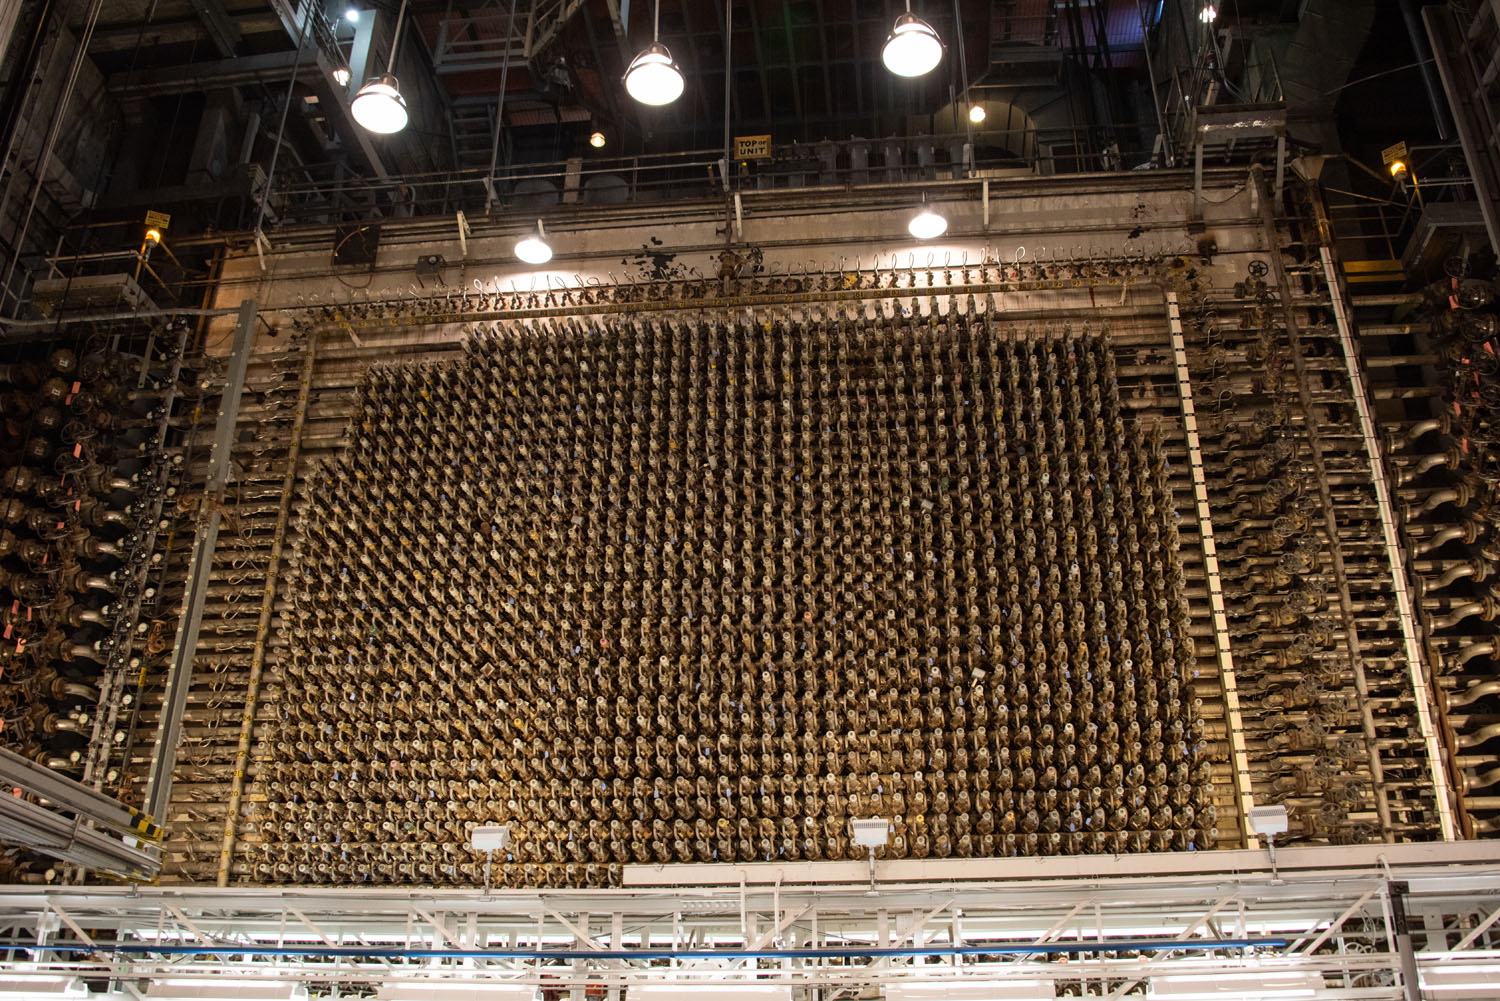 The deactivated core of Hanford’s B Reactor, the world’s first full-scale plutonium nuclear reactor, which began to produce fission chain reactions-—what’s known as “going critical”—for the first time in September 1944. Photography by Sean McDermott.